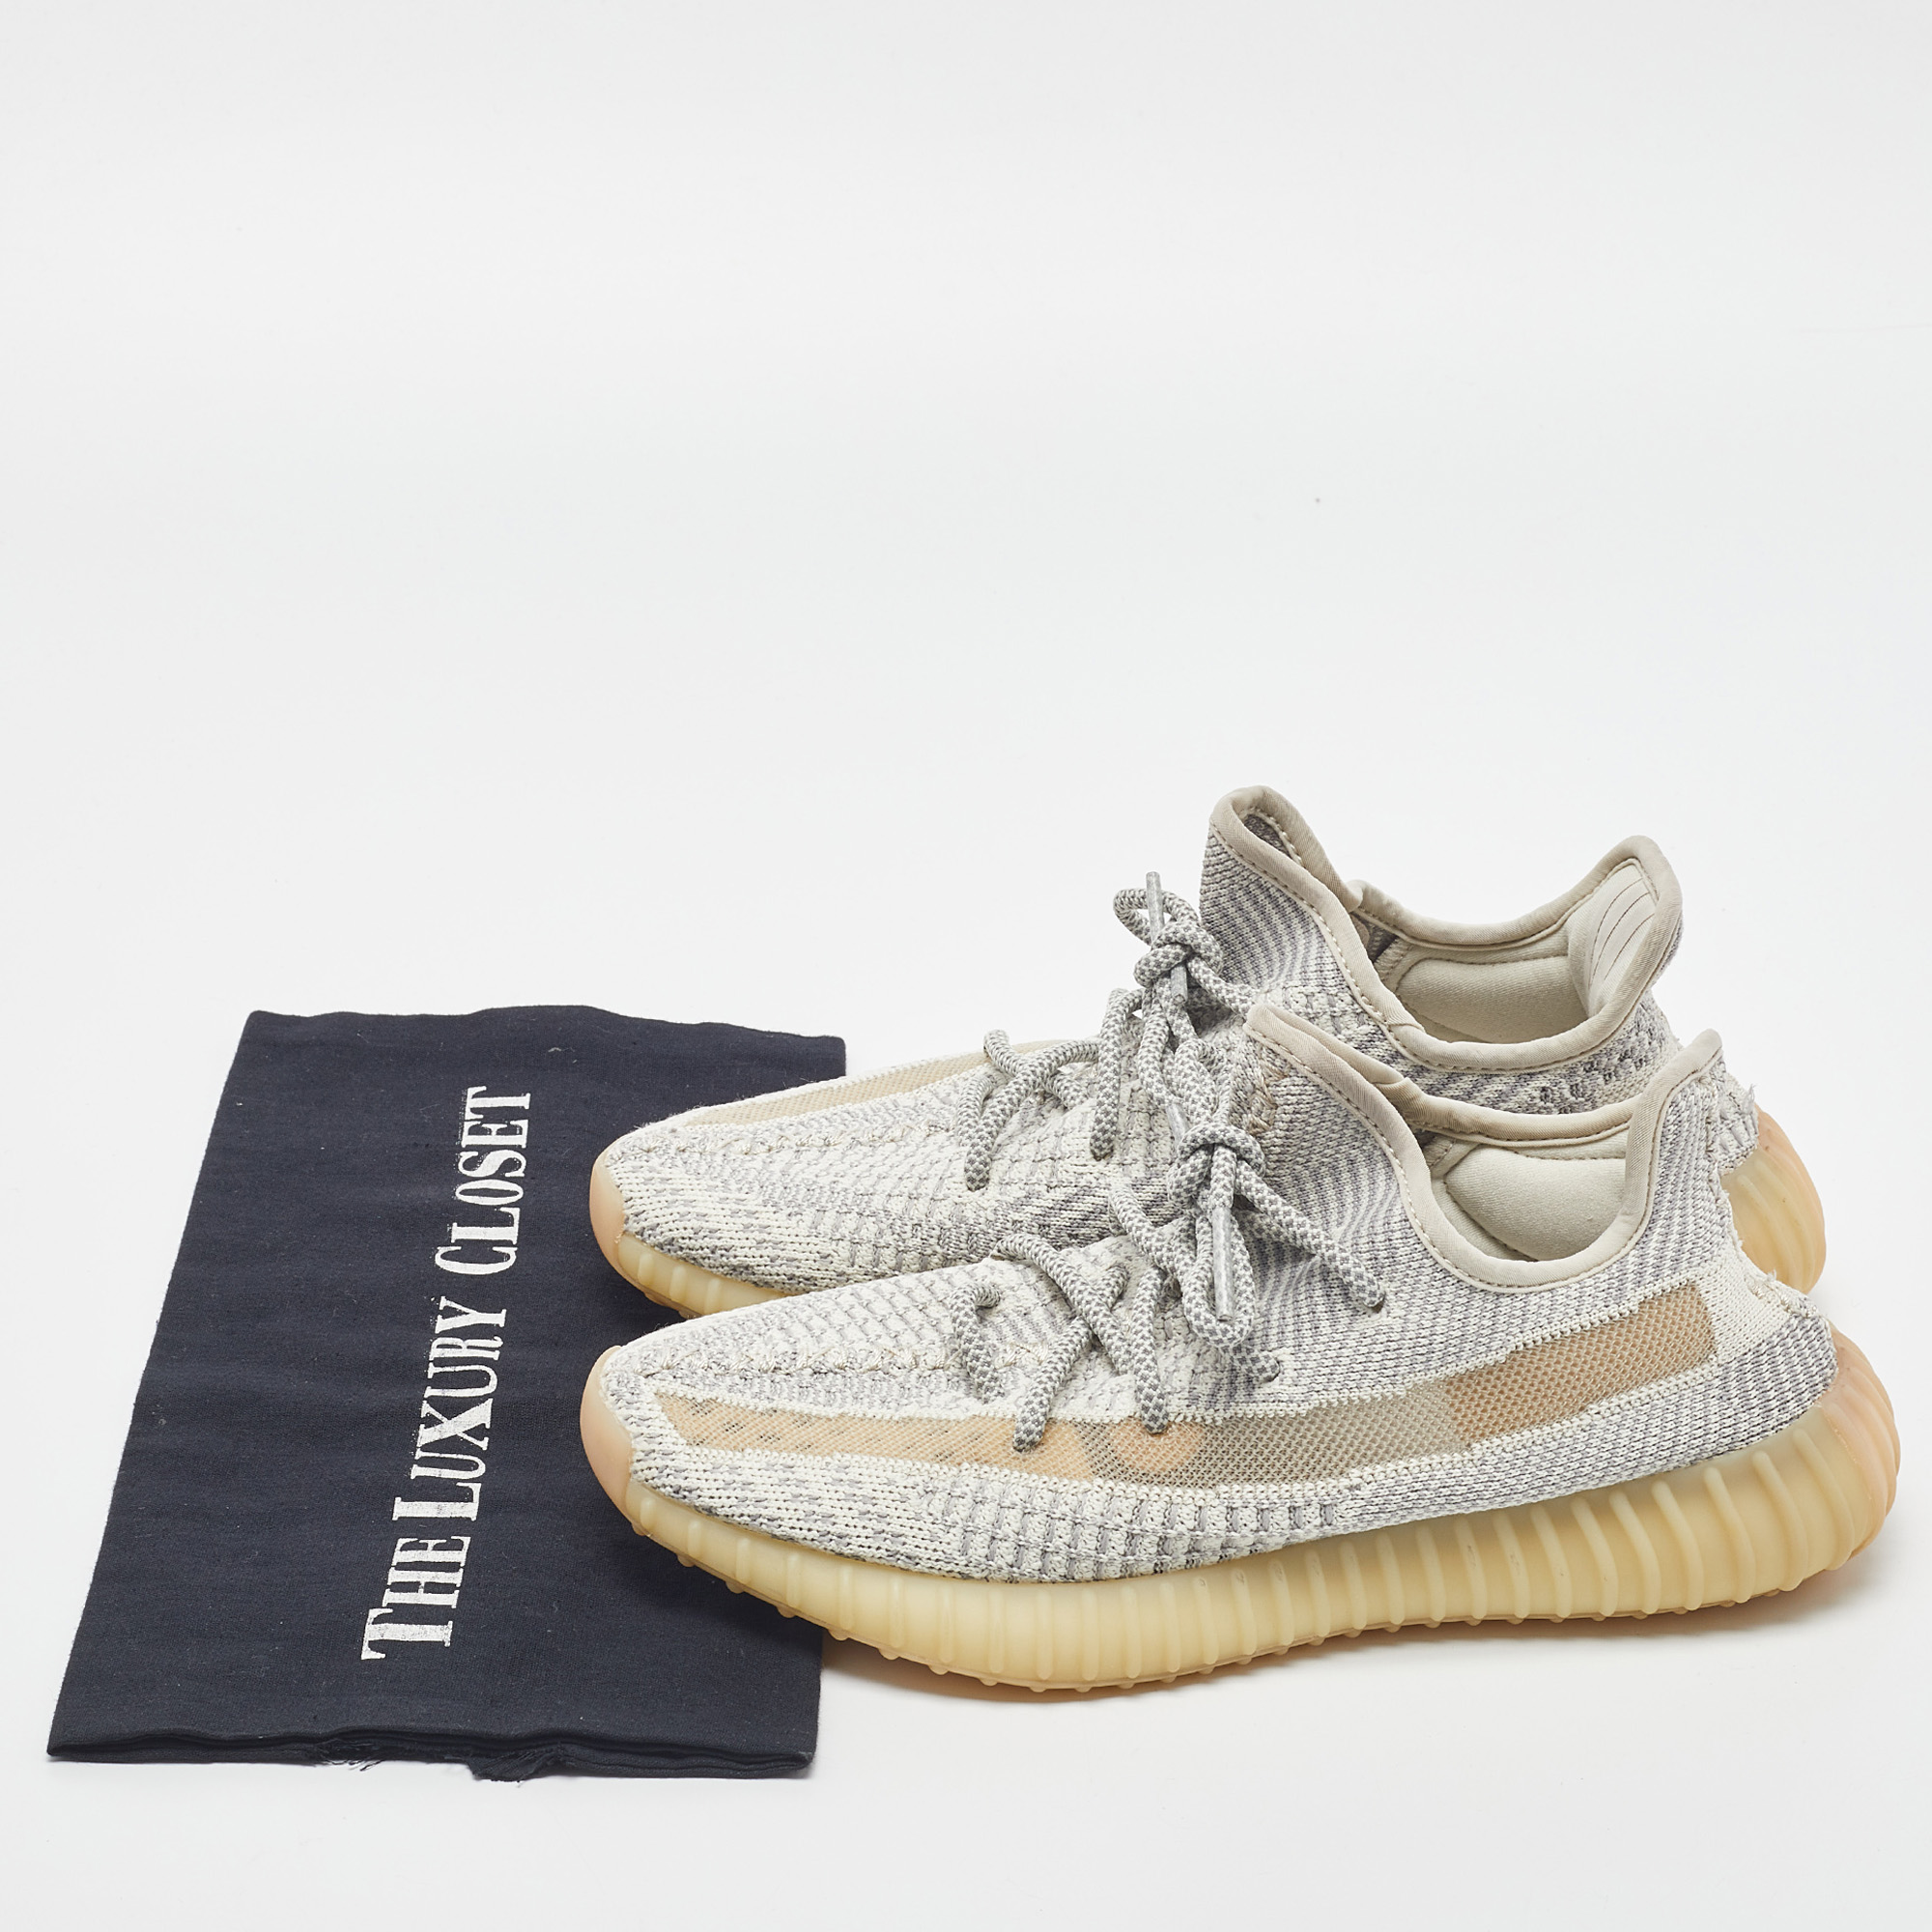 Yeezy X Adidas Boost 350 V2 Lundmark Non-Reflective Sneakers Size 39 1/3